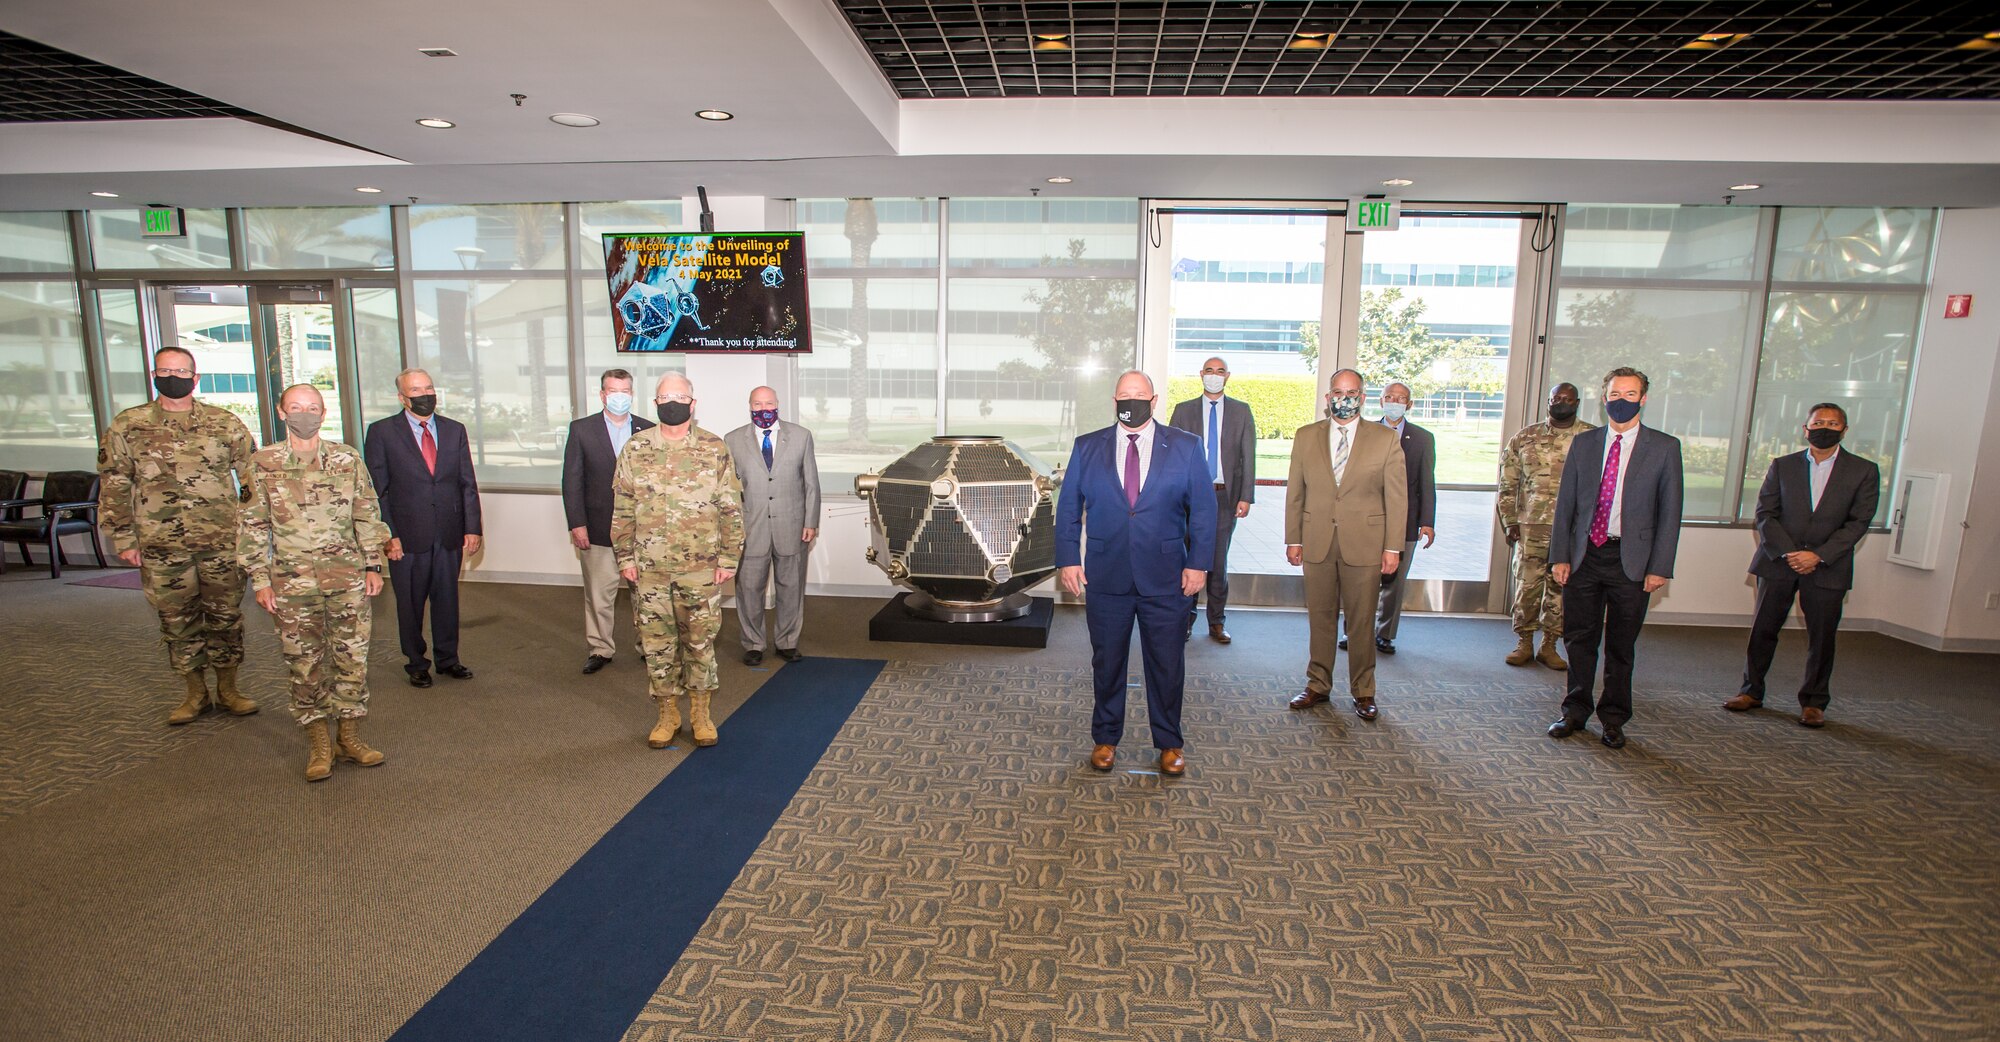 Representatives from the Space and Missile Systems Center and Northrop Grumman gathered on for the unveiling of a full-scale Vela satellite model presented by Northrop Grumman for permanent display at Los Angeles Air Force Base, California, May 4, 2021. Originated in 1960, Vela was the first space-based system used for nuclear surveillance. Today, the mission of monitoring nuclear detonations continues with payloads hosted on GPS satellites. (U.S. Space Force photo by Van Ha)